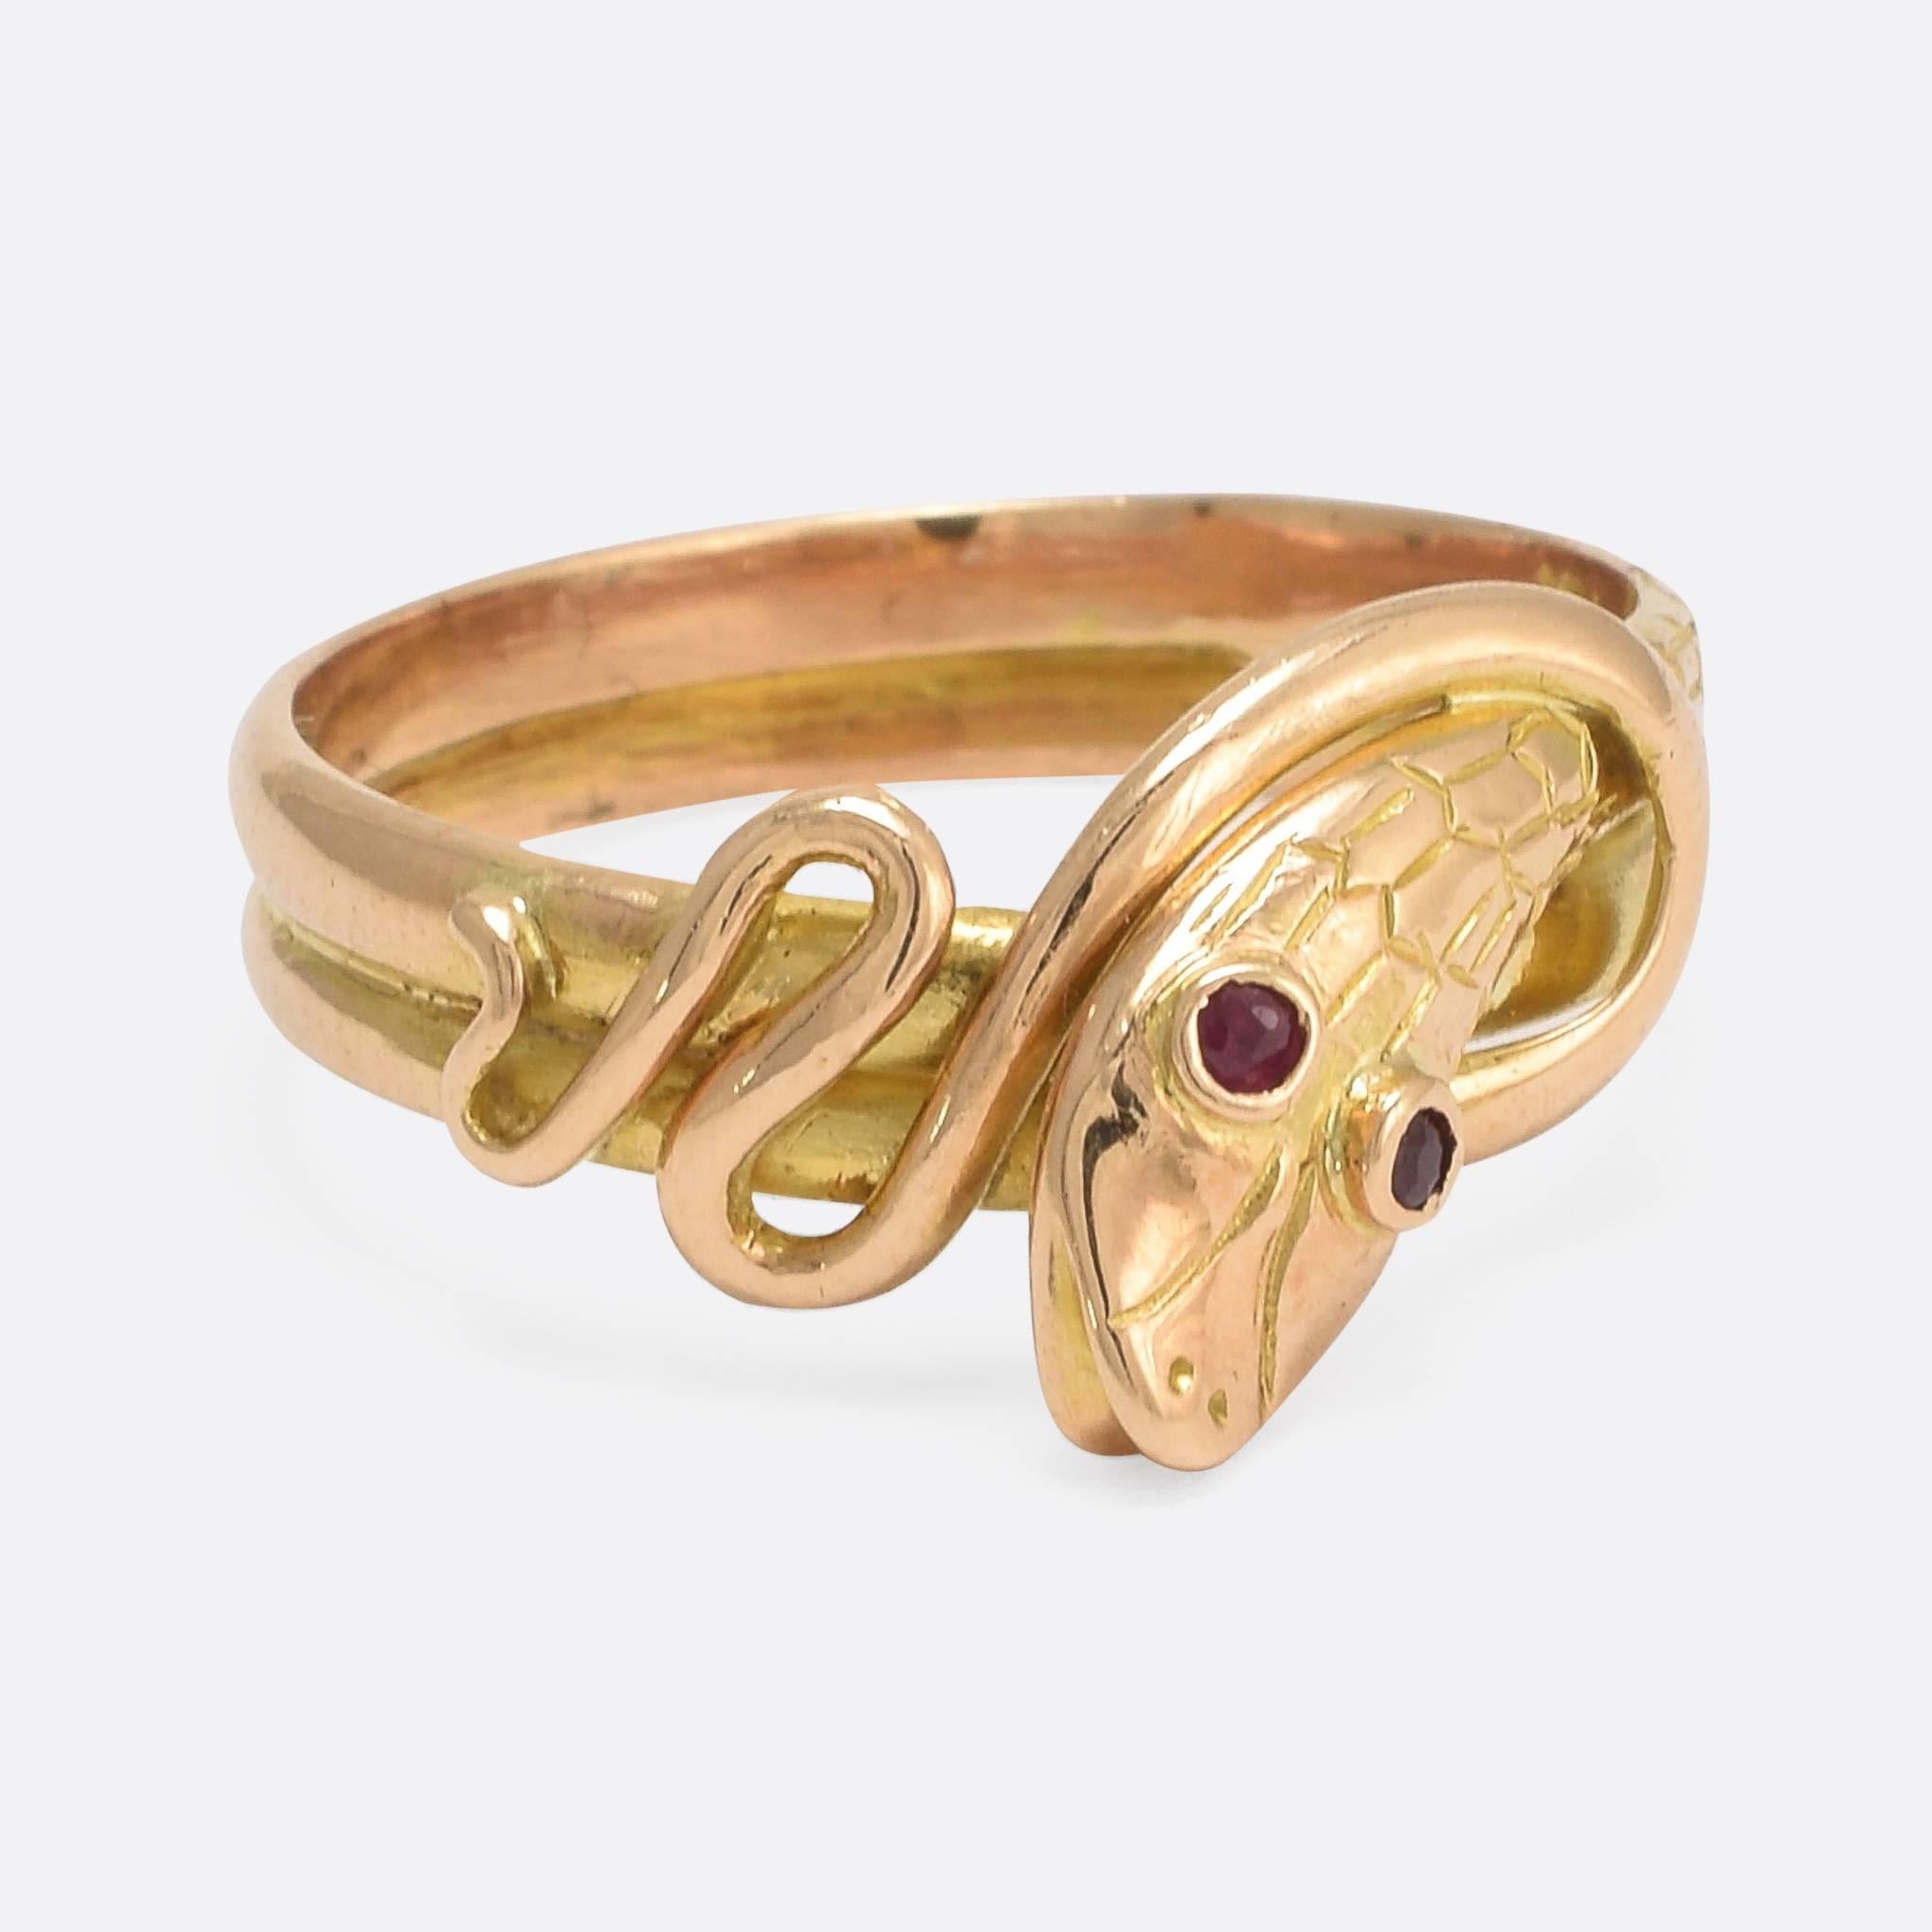 This antique snake ring is a particularly fine example of the style, modelled in 18k rose gold and set with faceted ruby eyes. The head is beautifully textured, with scale details and a cheeky open mouth. The snake body wraps around the finger